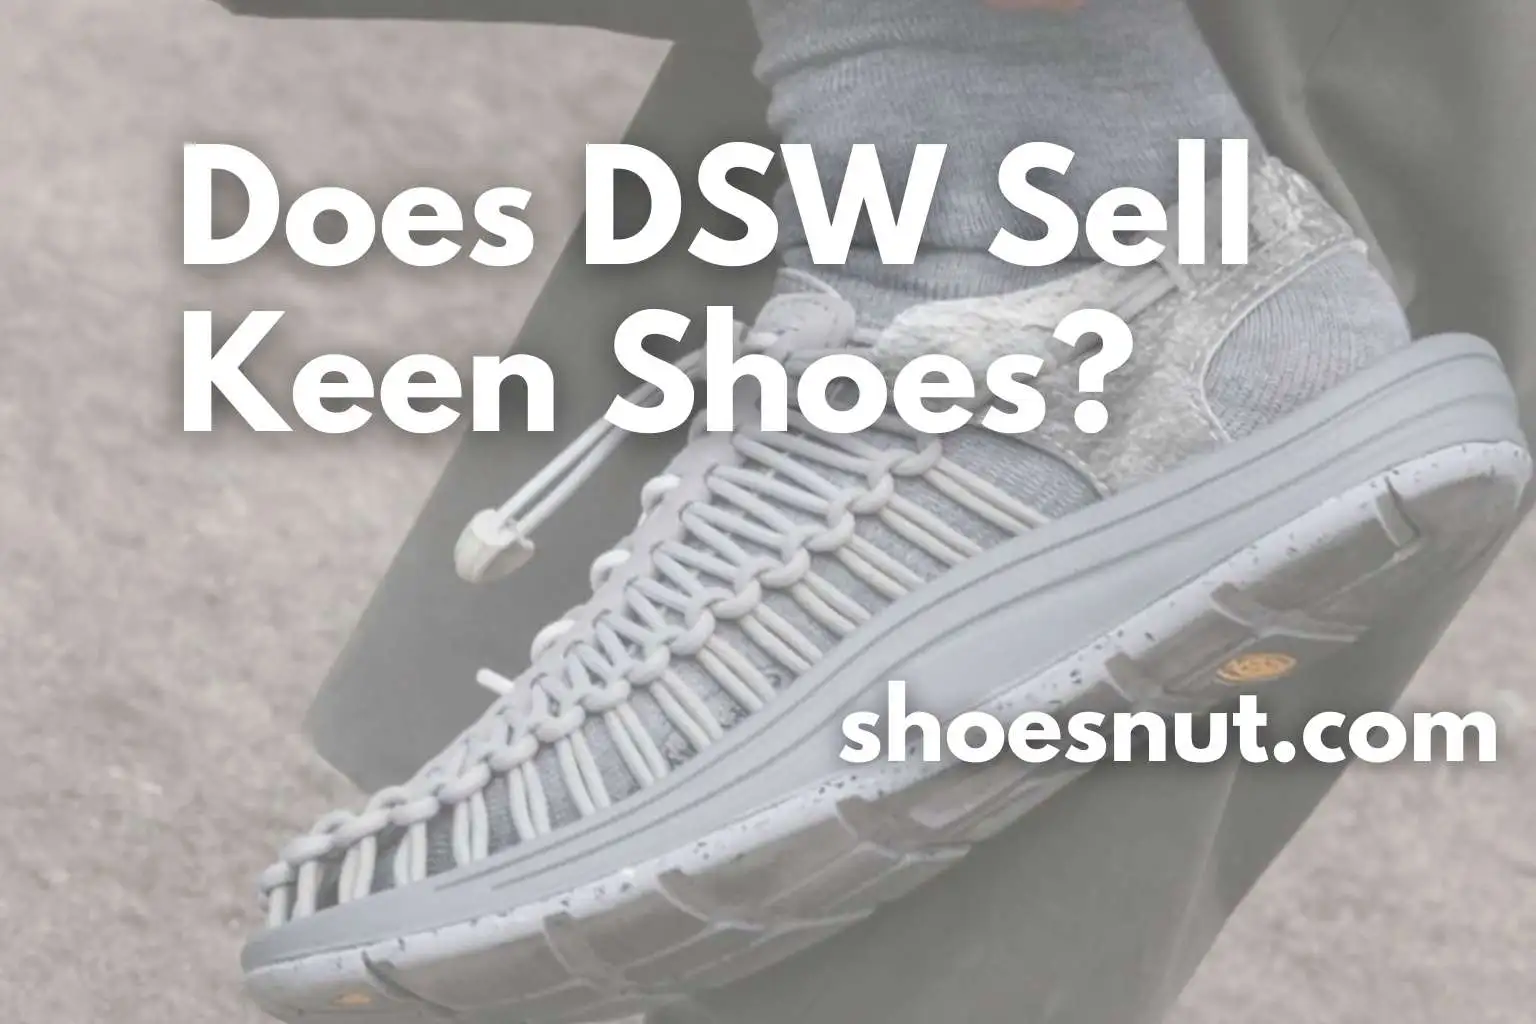 Does DSW Sell Keen Shoes?